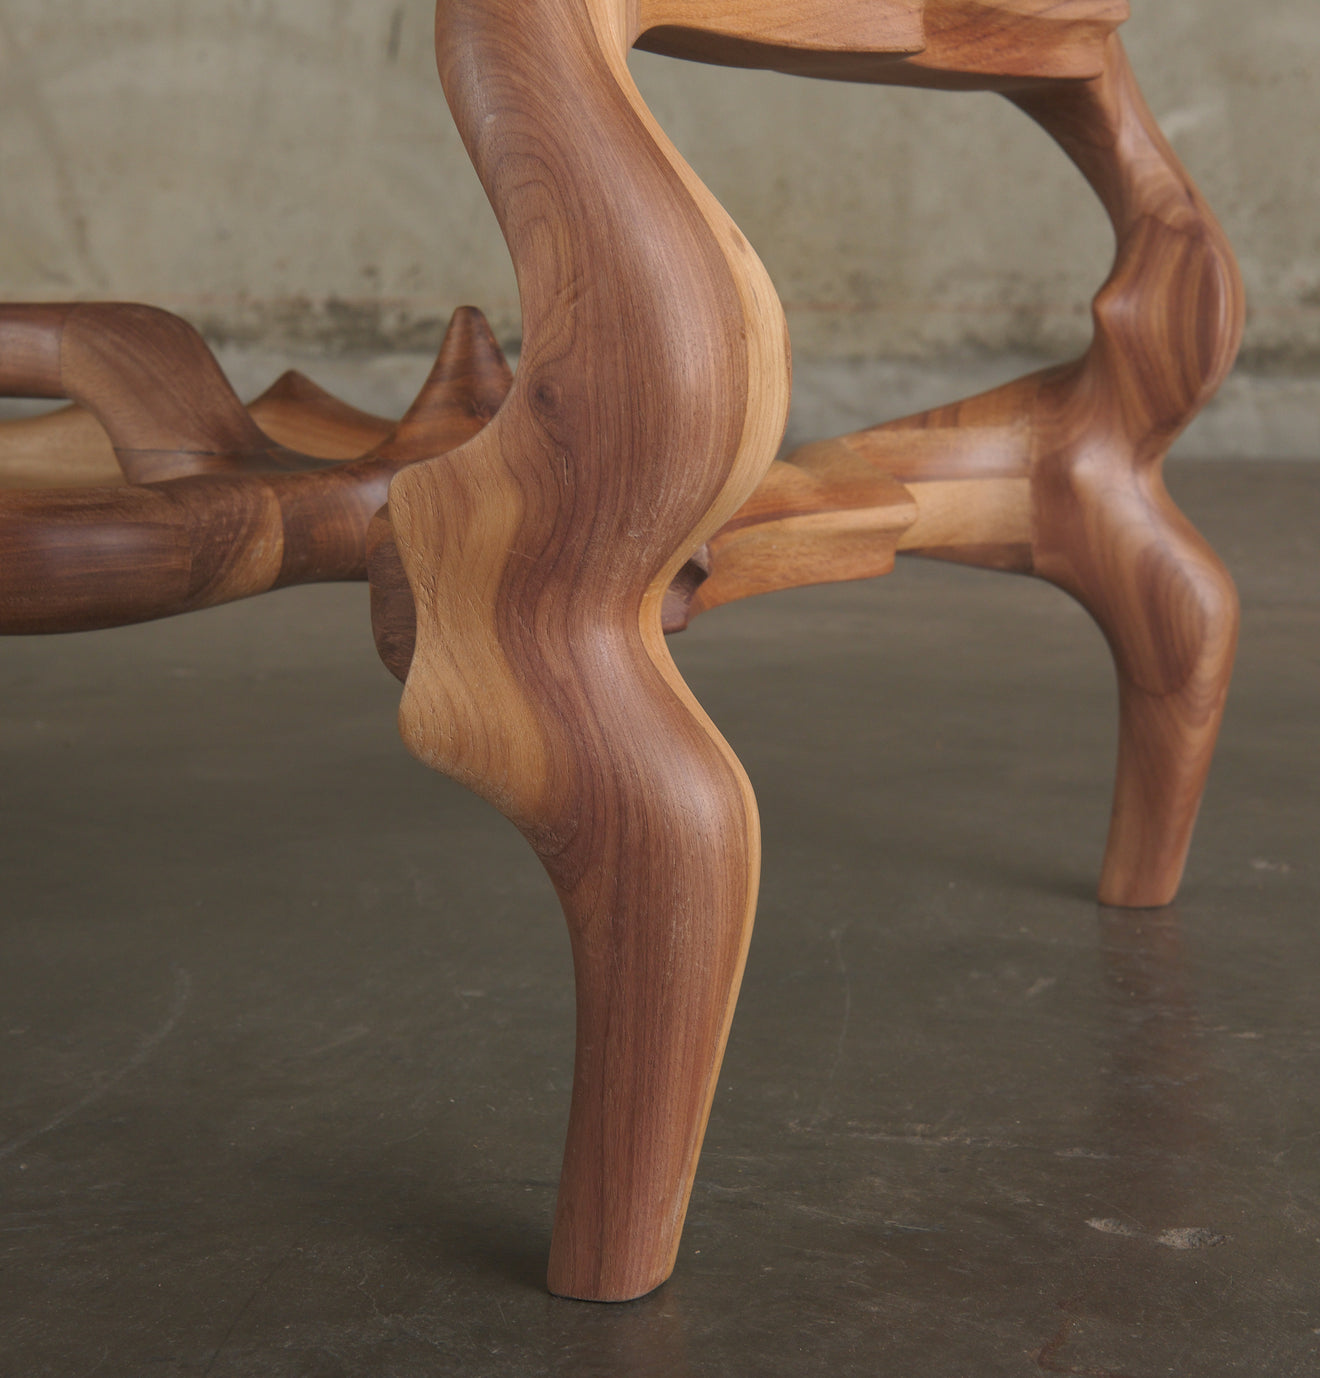 LARGE STOOL DESIGNED BY VICTOR ROMAN MANUFACTURED BY ATELIER(ER)